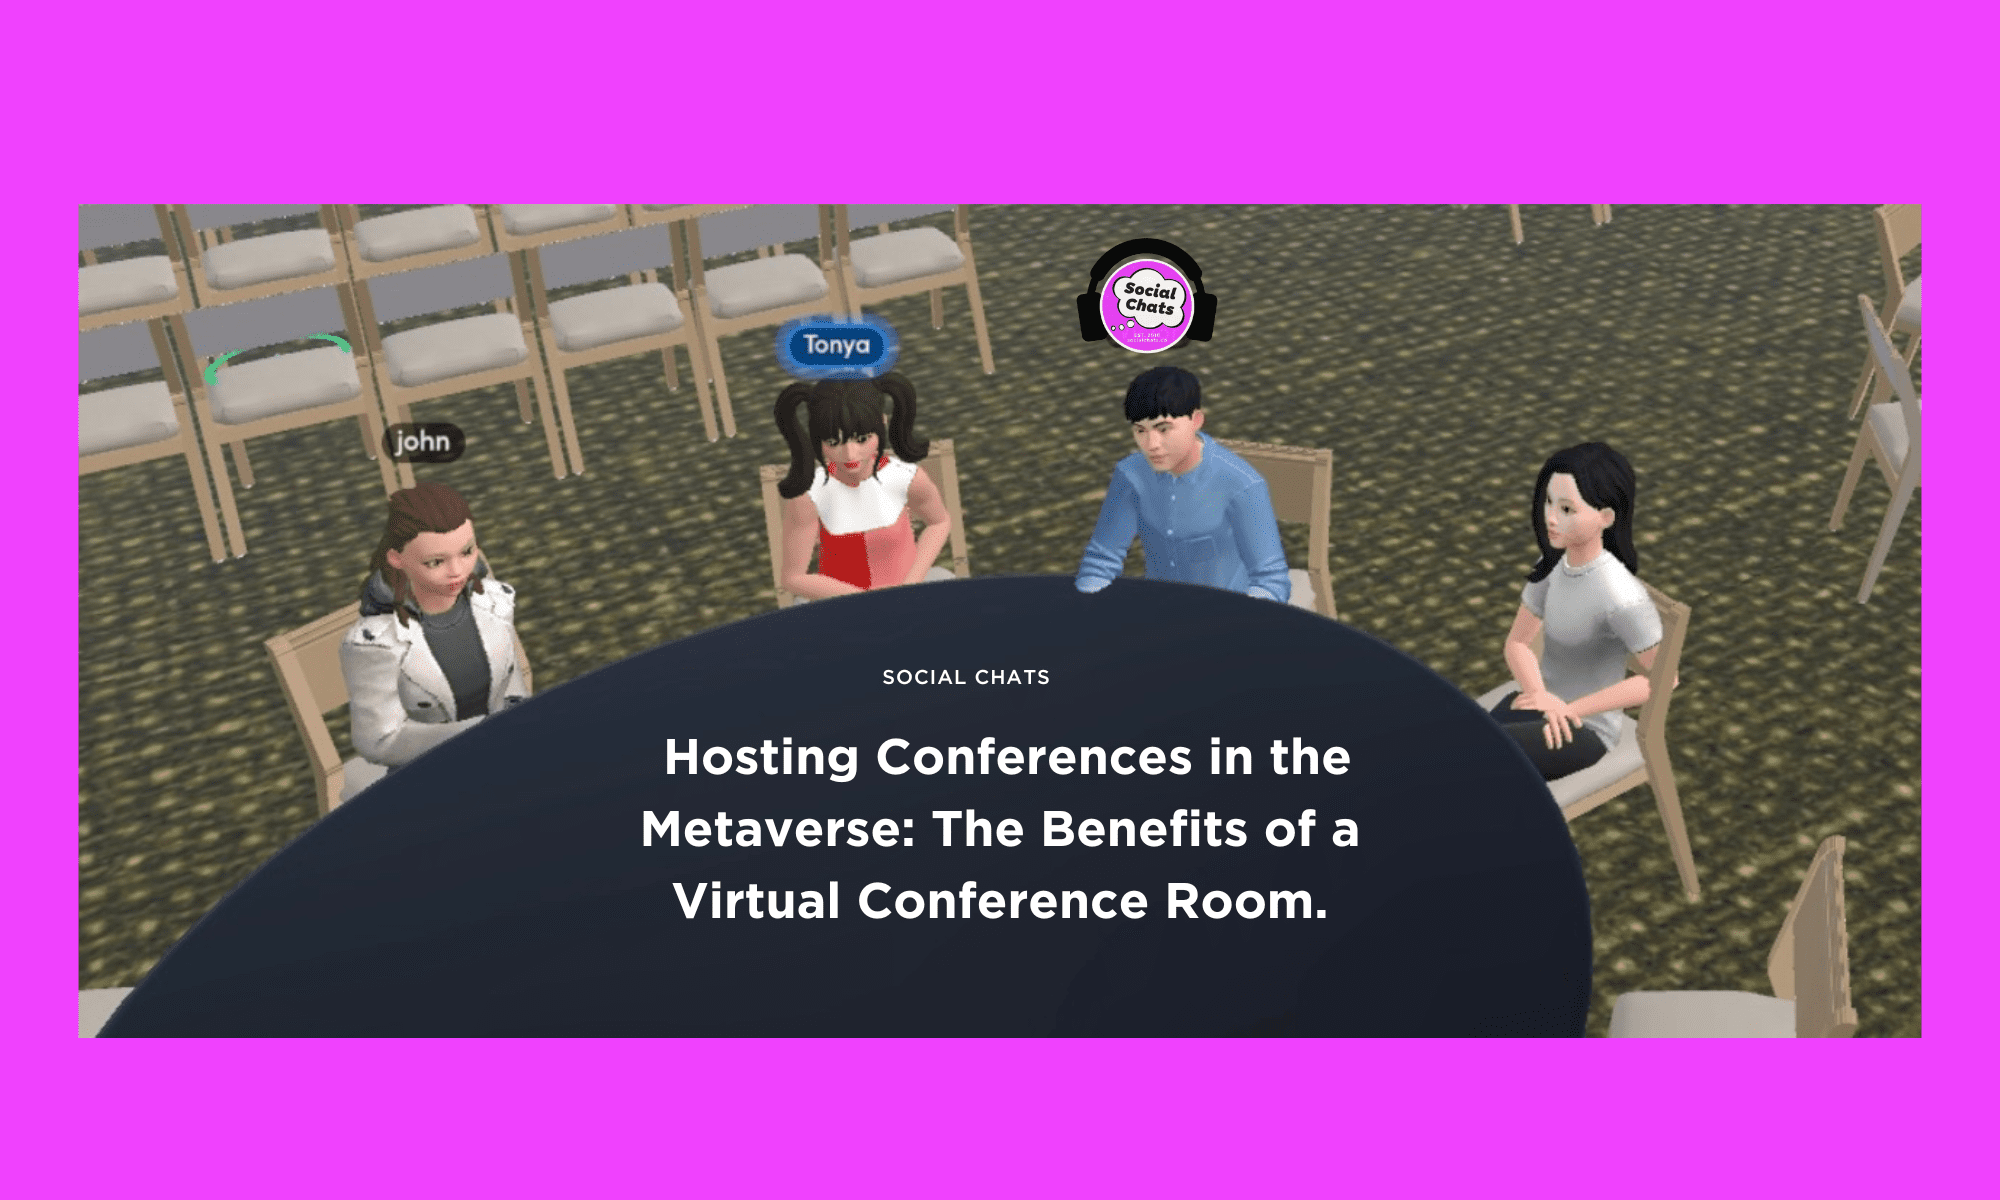 Hosting Conferences in the Metaverse: The Benefits of a Virtual Conference Room